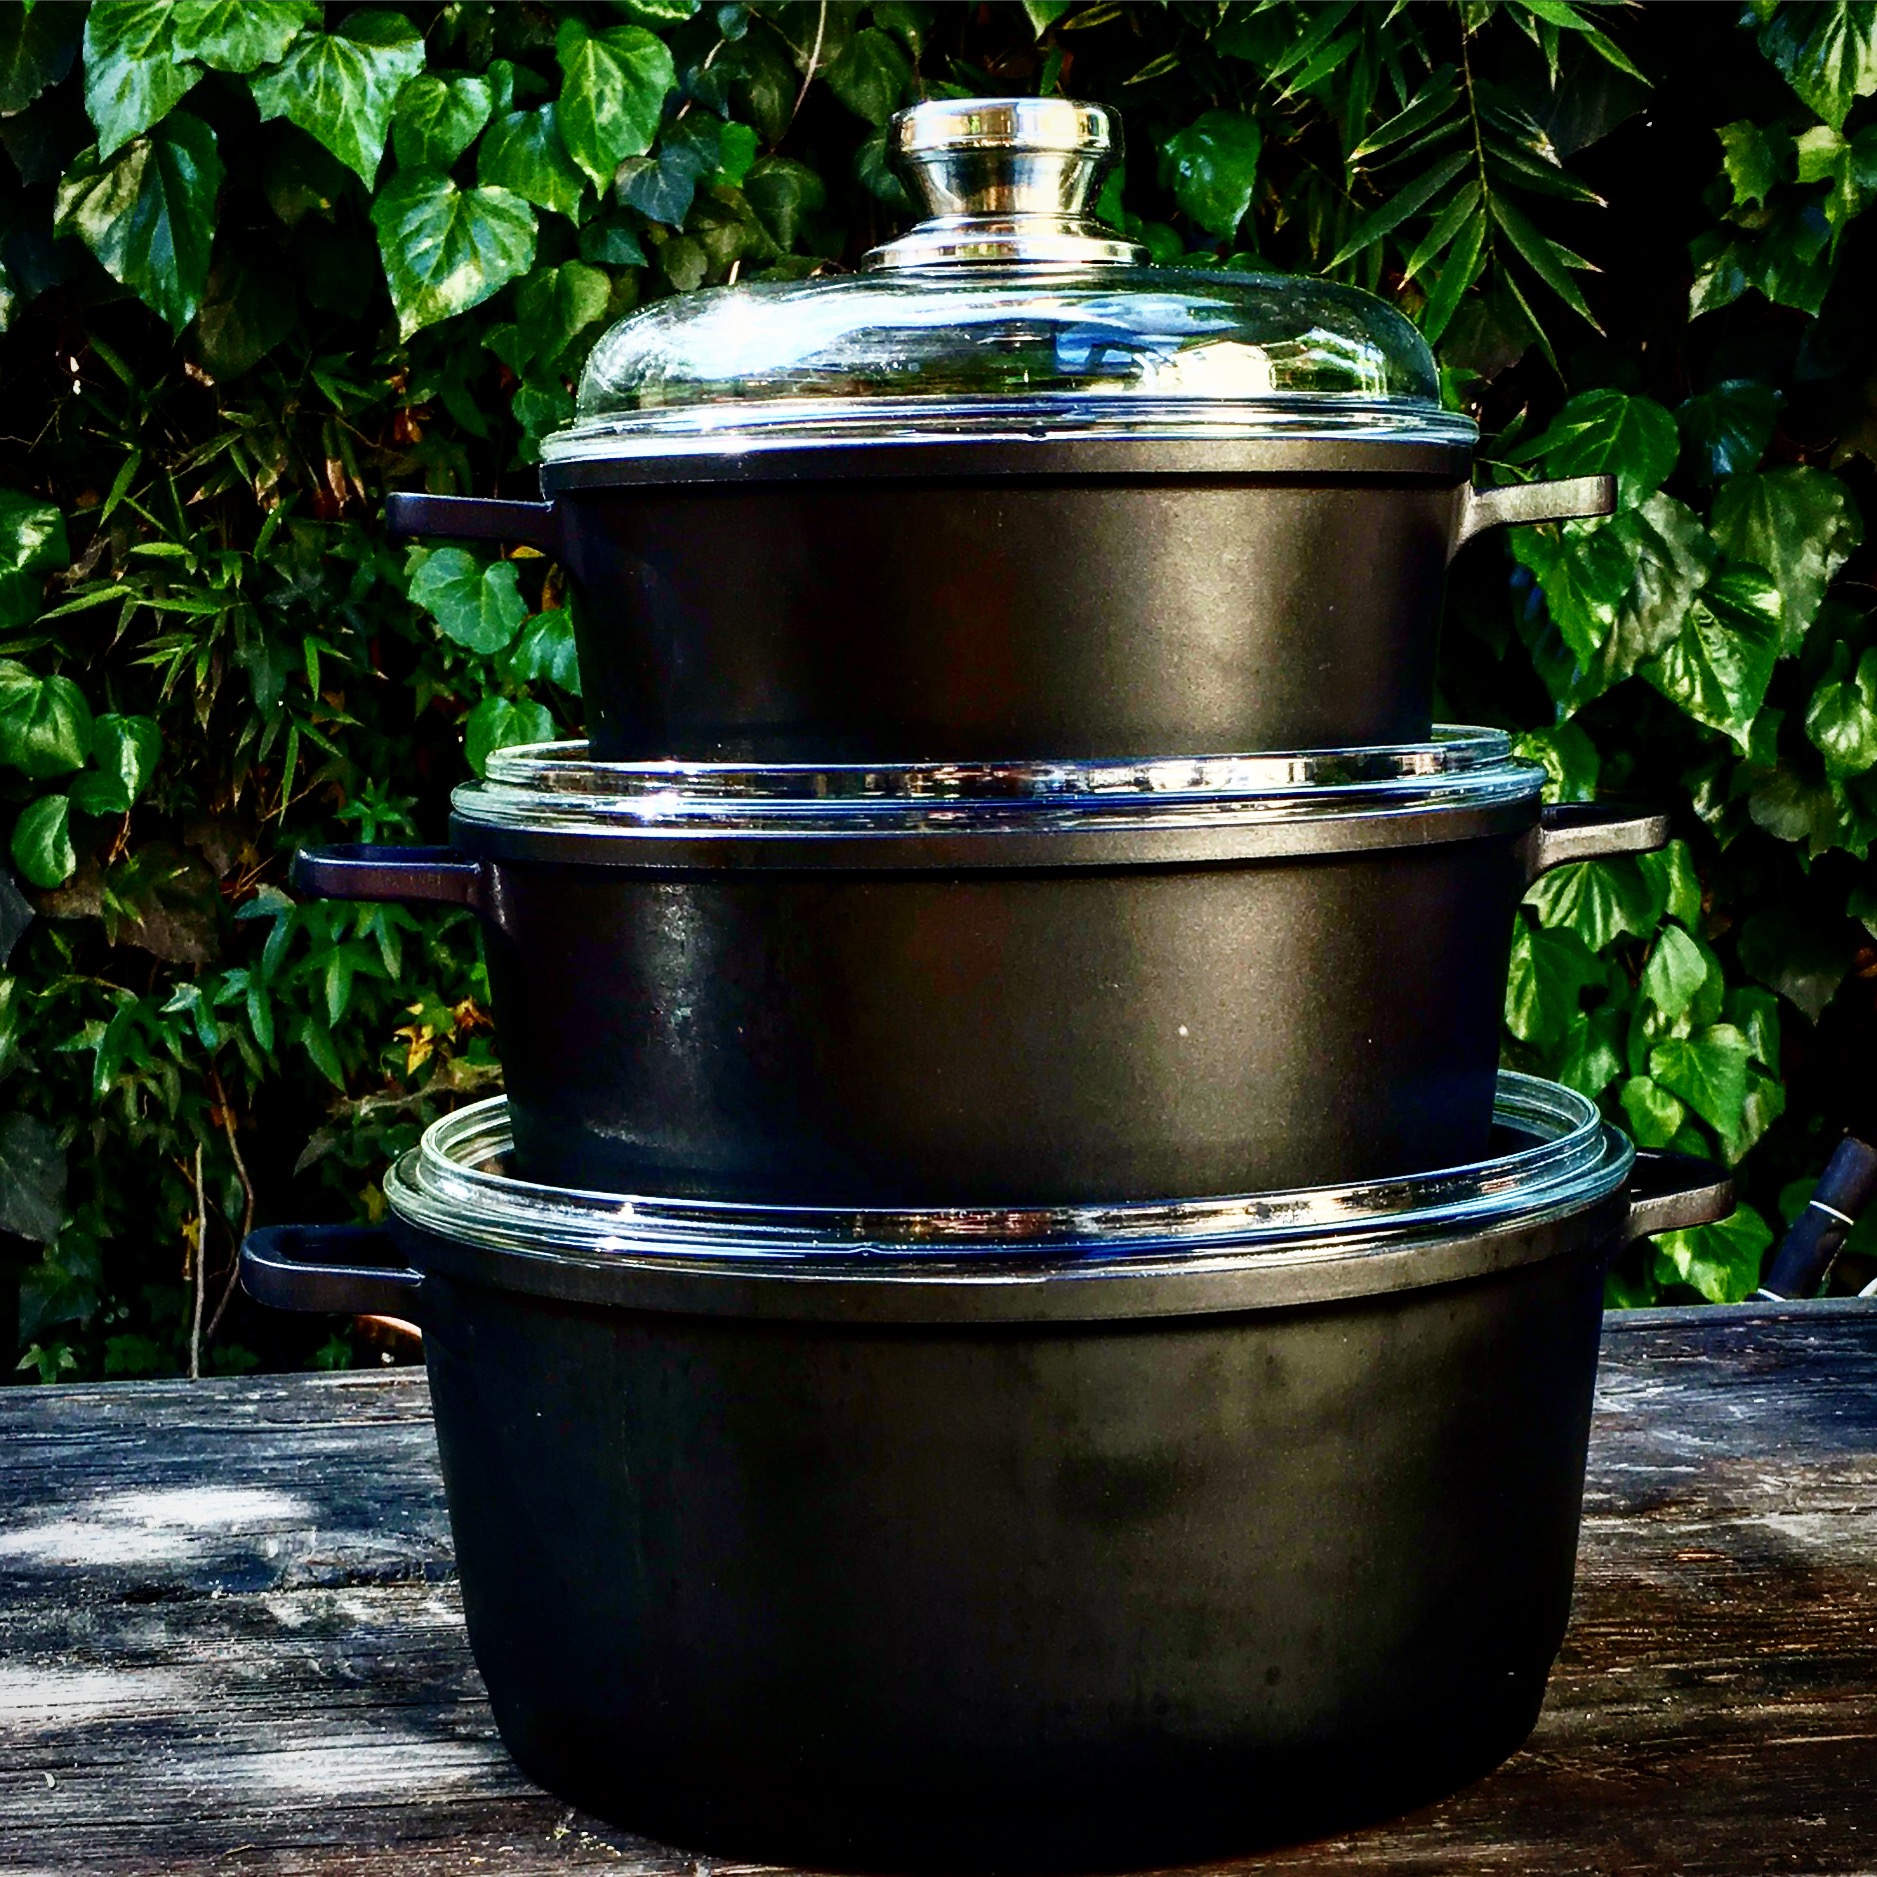 EuroCAST's Dutch ovens are a dream. The biggest one is more than 7 quarts big, and is what I used for this recipe. The middle one is 5 quarts, available online only. The smallest pot at the top is our 3-quart sauce pan. It's a work-horse for me. I love it. Click on the image to learn more about the large one.